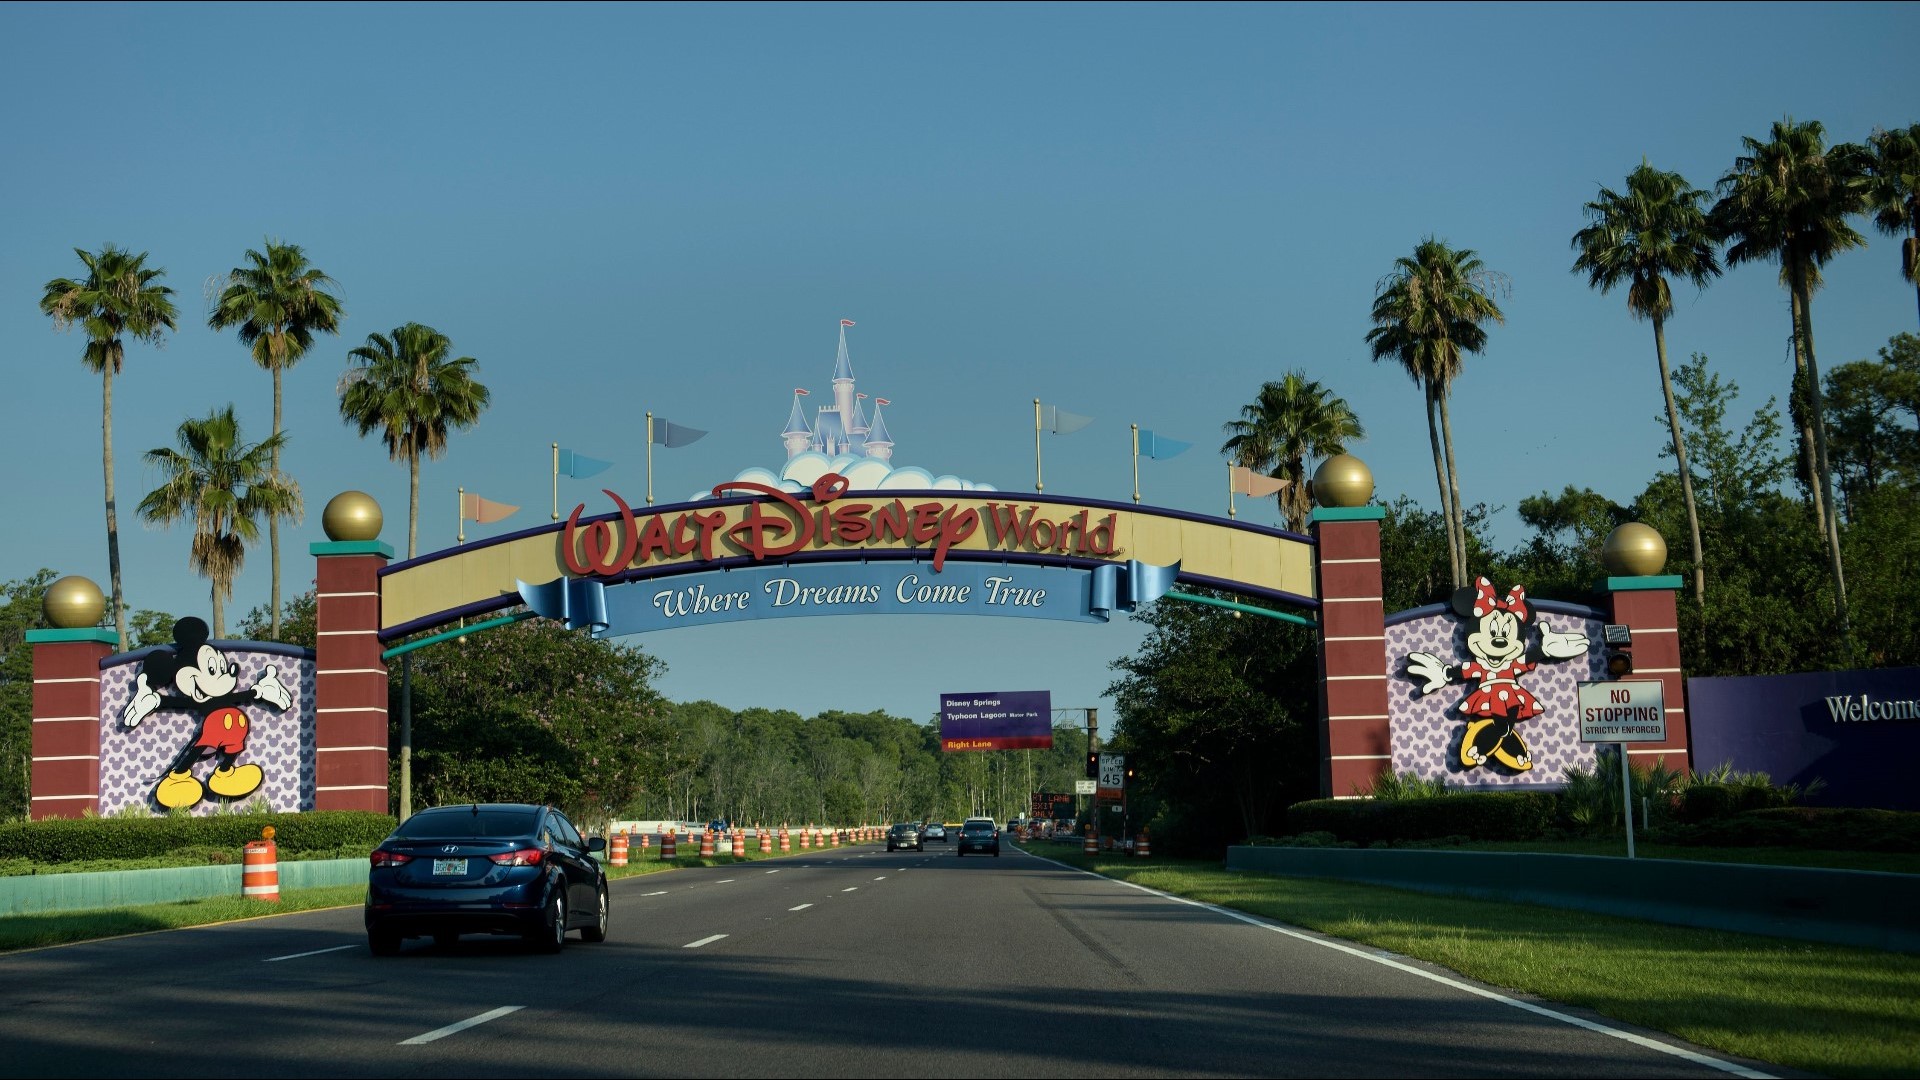 The new policy will go into effect on May 20 at Disney World, and June 18 at Disneyland.